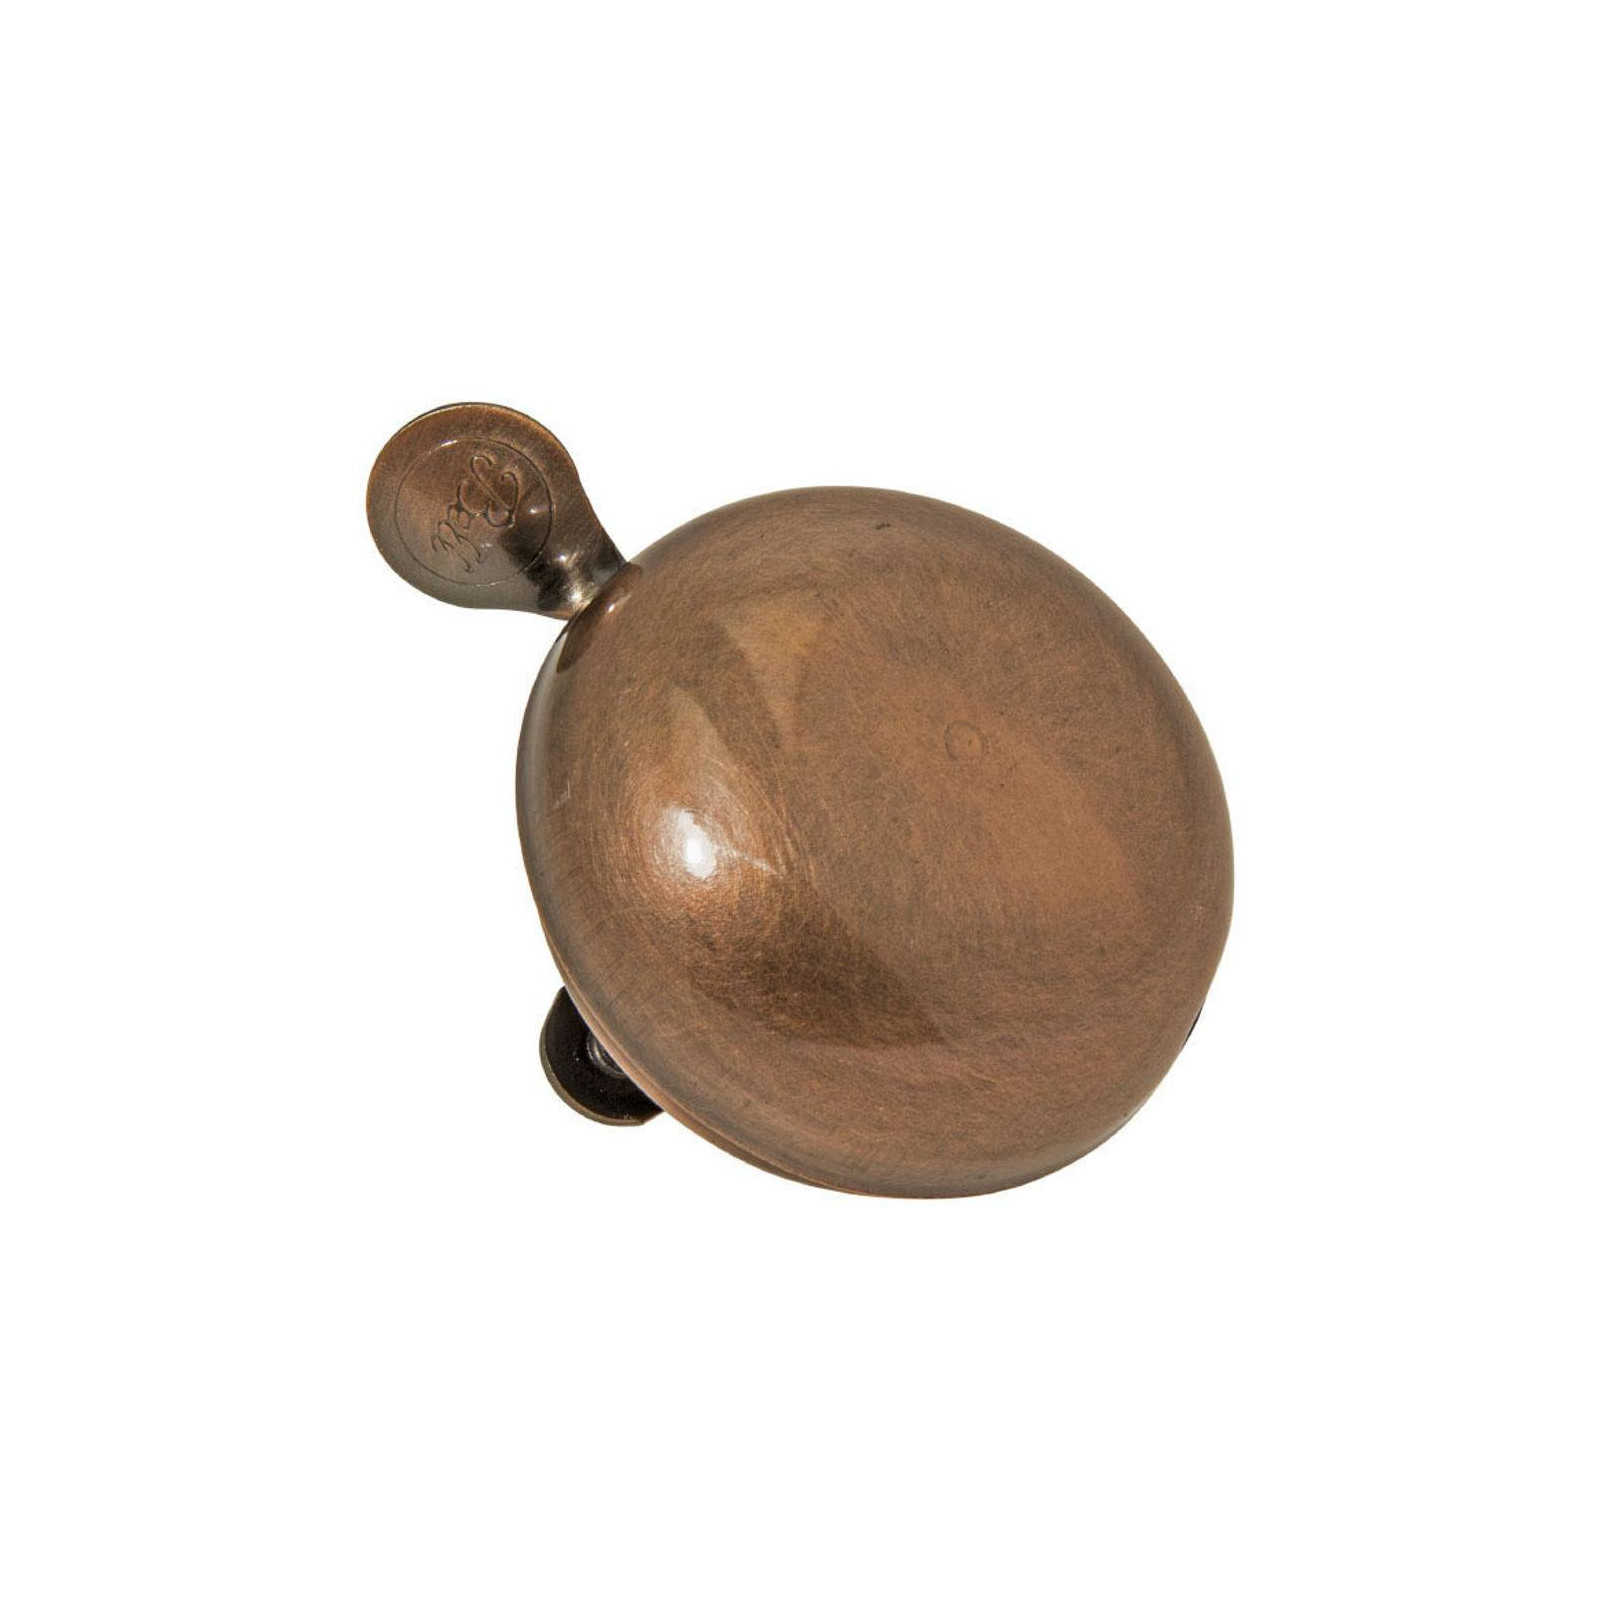 RETRO Bicycle Bell  60mm copper made of steel ding dong